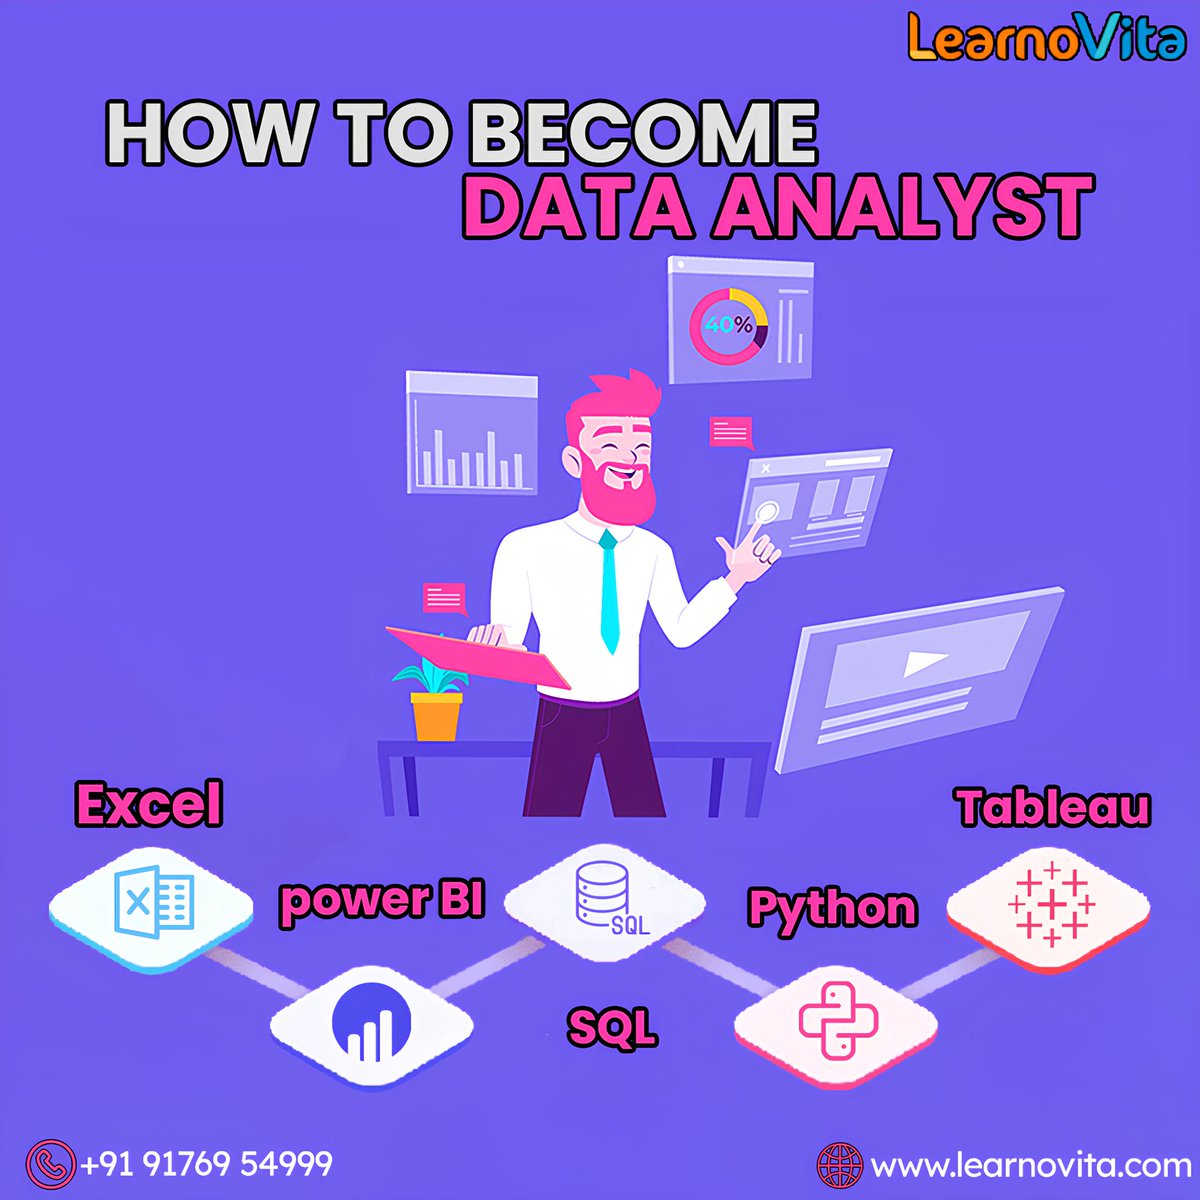 Dive into insights, make informed decisions, and propel your career forward! Unlock the power of data with our data analyst training. Enroll Now

#acte #DataAnalytics #DataDriven #DataAnalysis #DataScience #DataInsights #DataVisualization #Analytics #BigData #DataSkills #Career